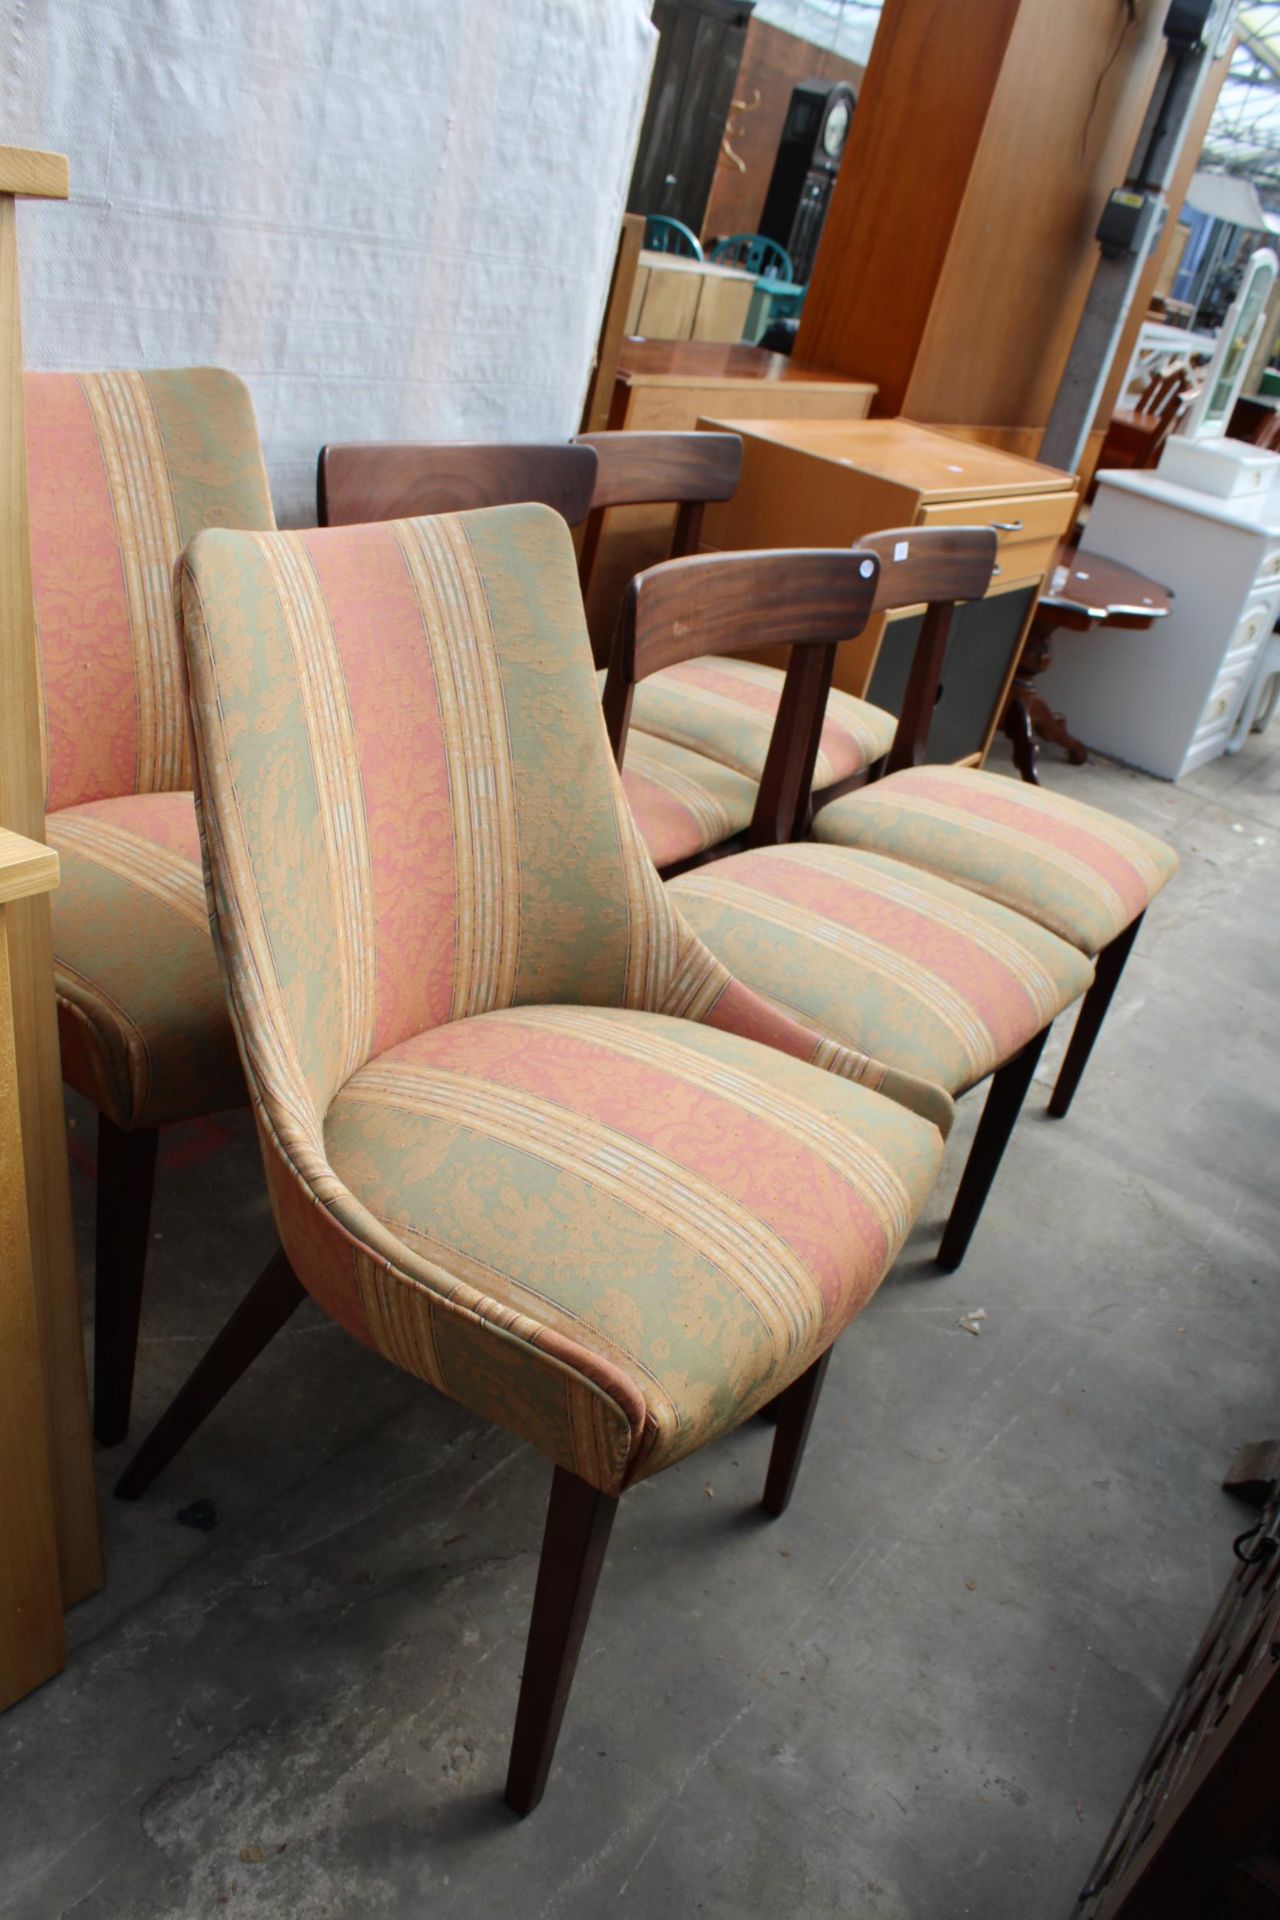 A SET OF FOUR RETRO TEAK DINING CHAIRS AND A PAIR OF CHAIRS IN MATCHING UPHOLSTERY - Image 3 of 3